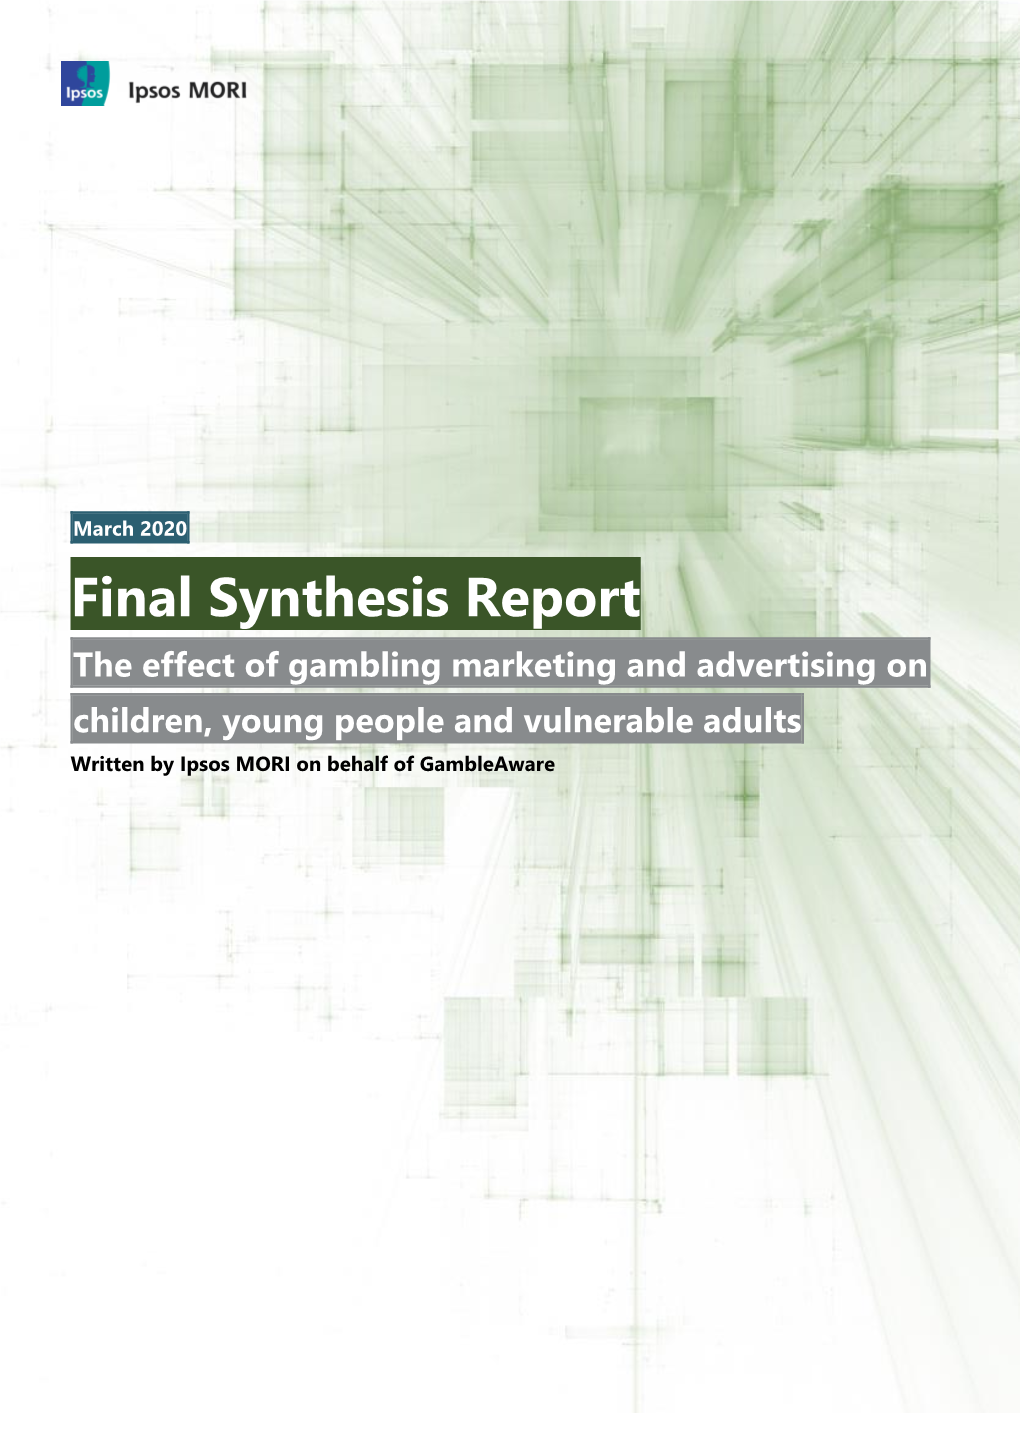 Final Synthesis Report